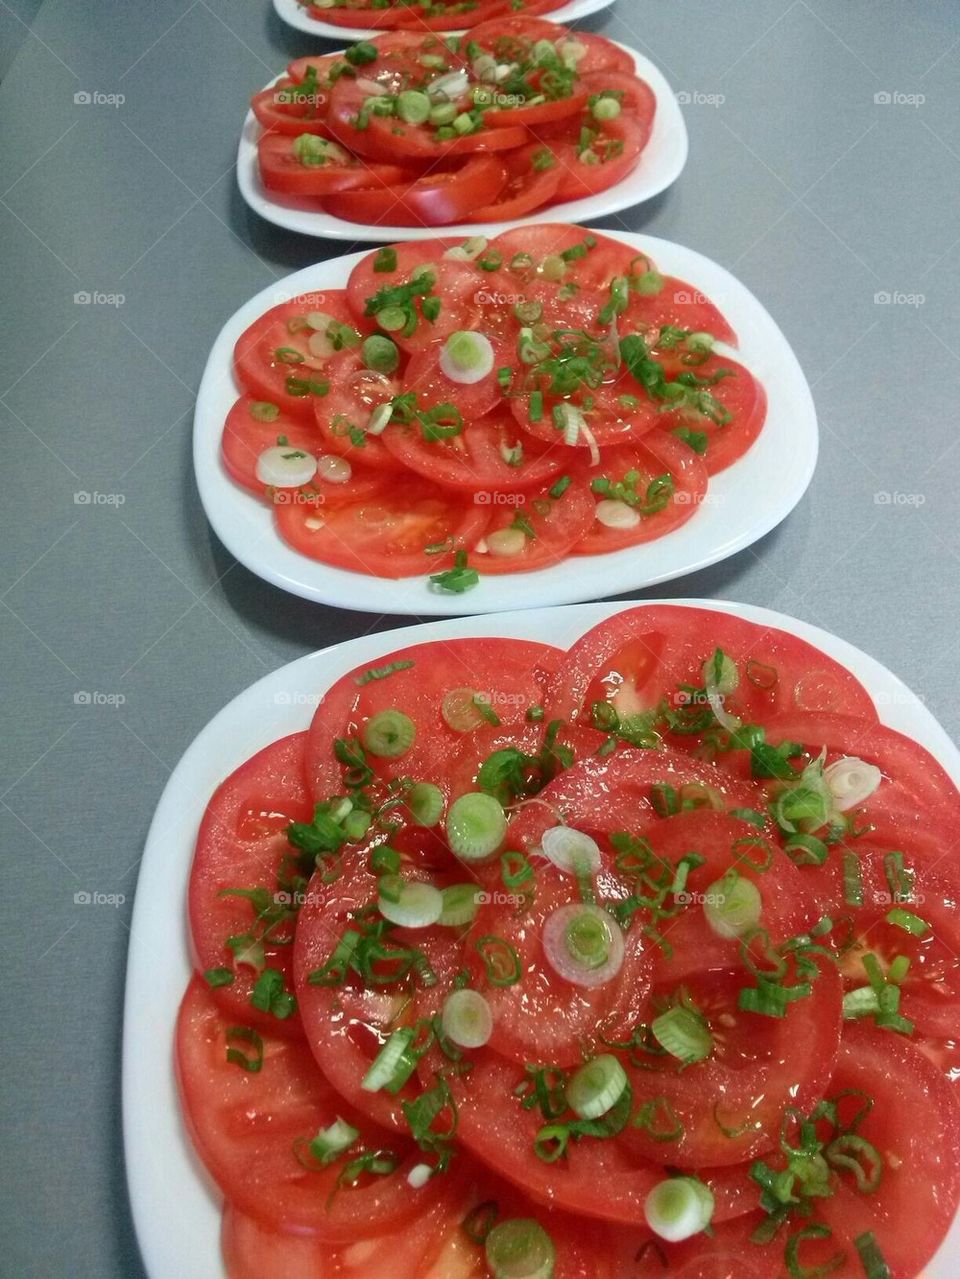 Tomatoes in the plate